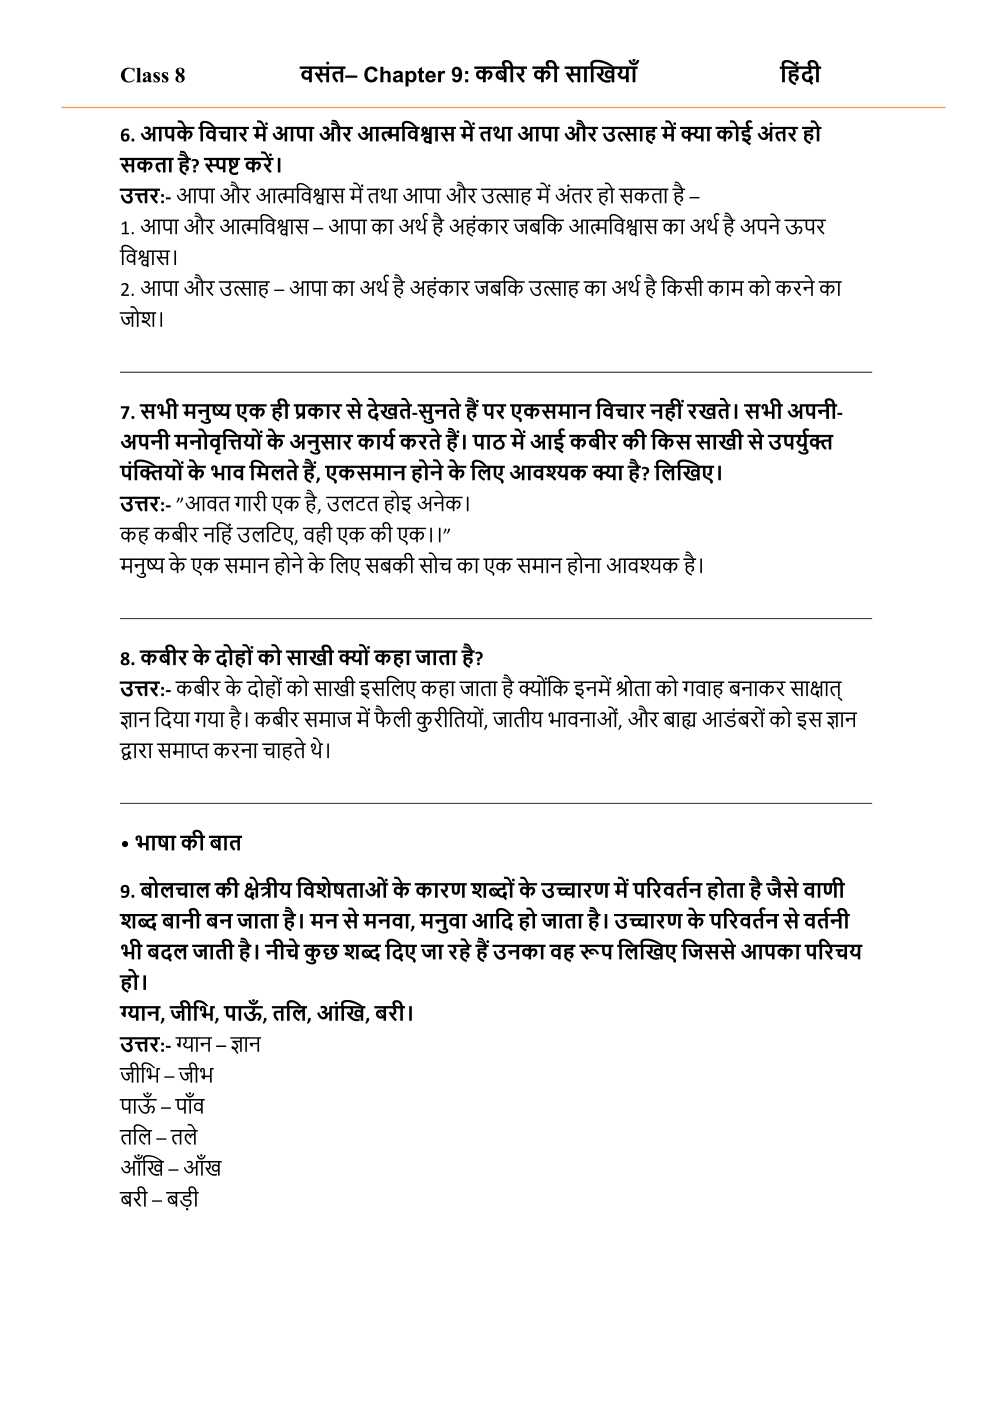 NCERT Solutions For Class 8 Hindi Vasant Chapter 9